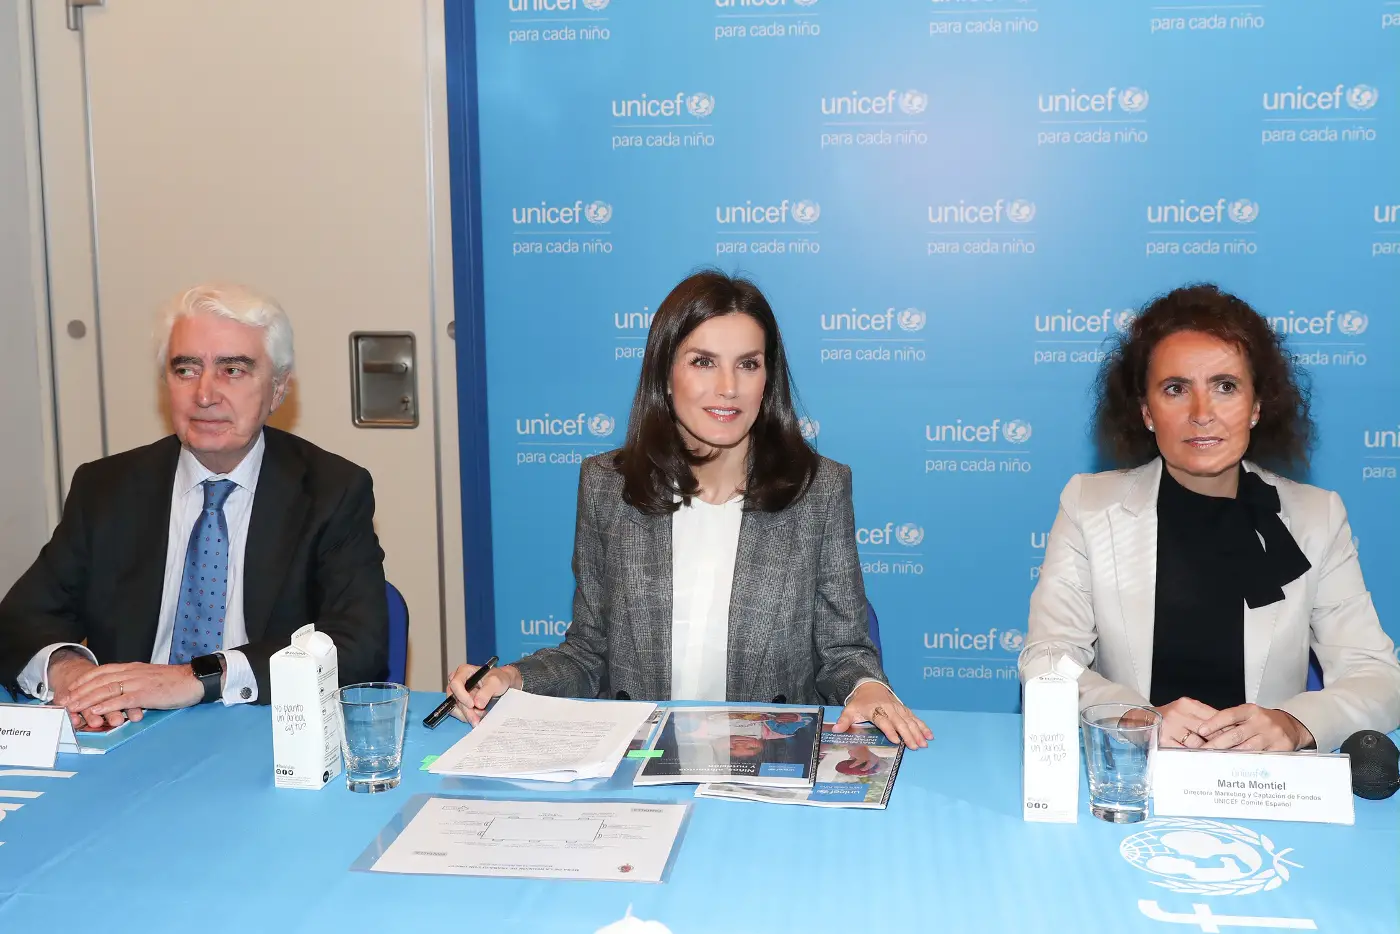 Queen Letizia of Spain at the UNICEF Meeting